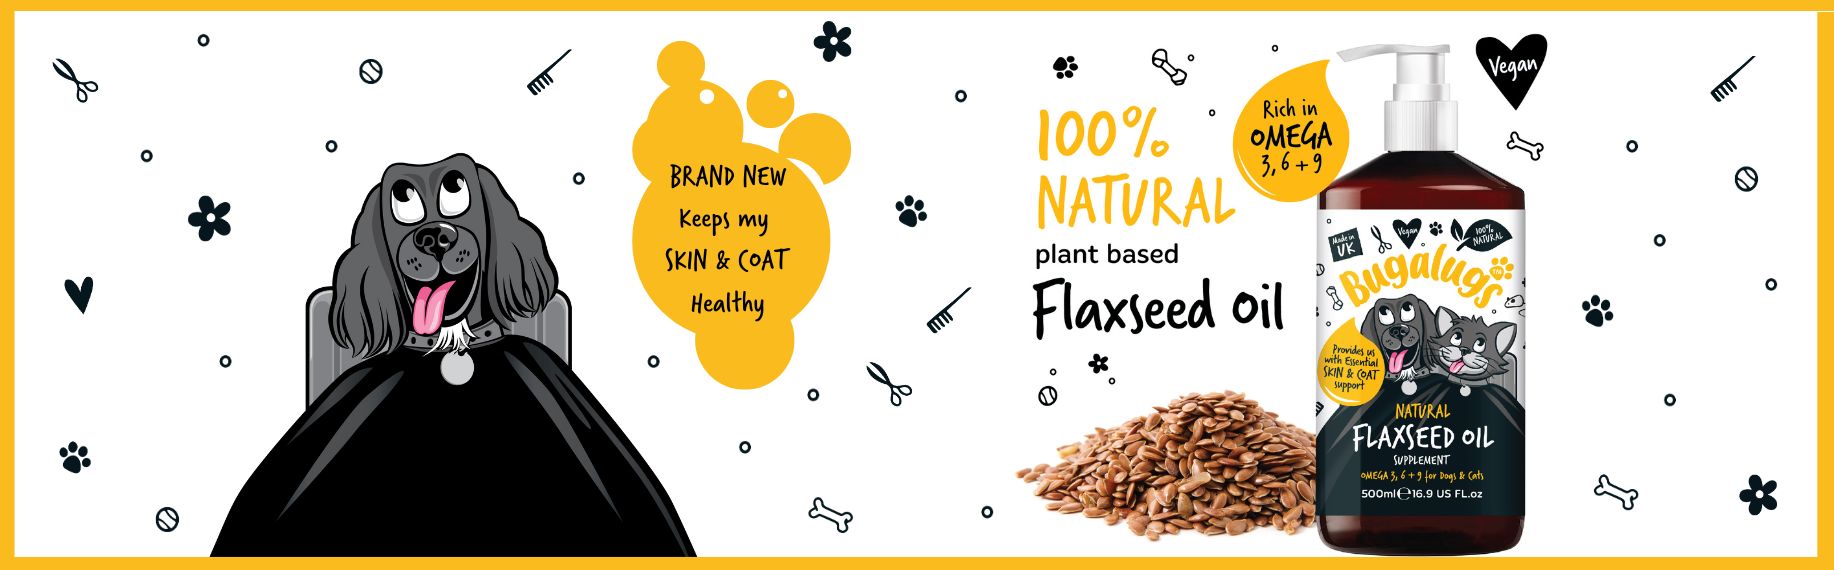 Flaxseed Oil Blog Banner